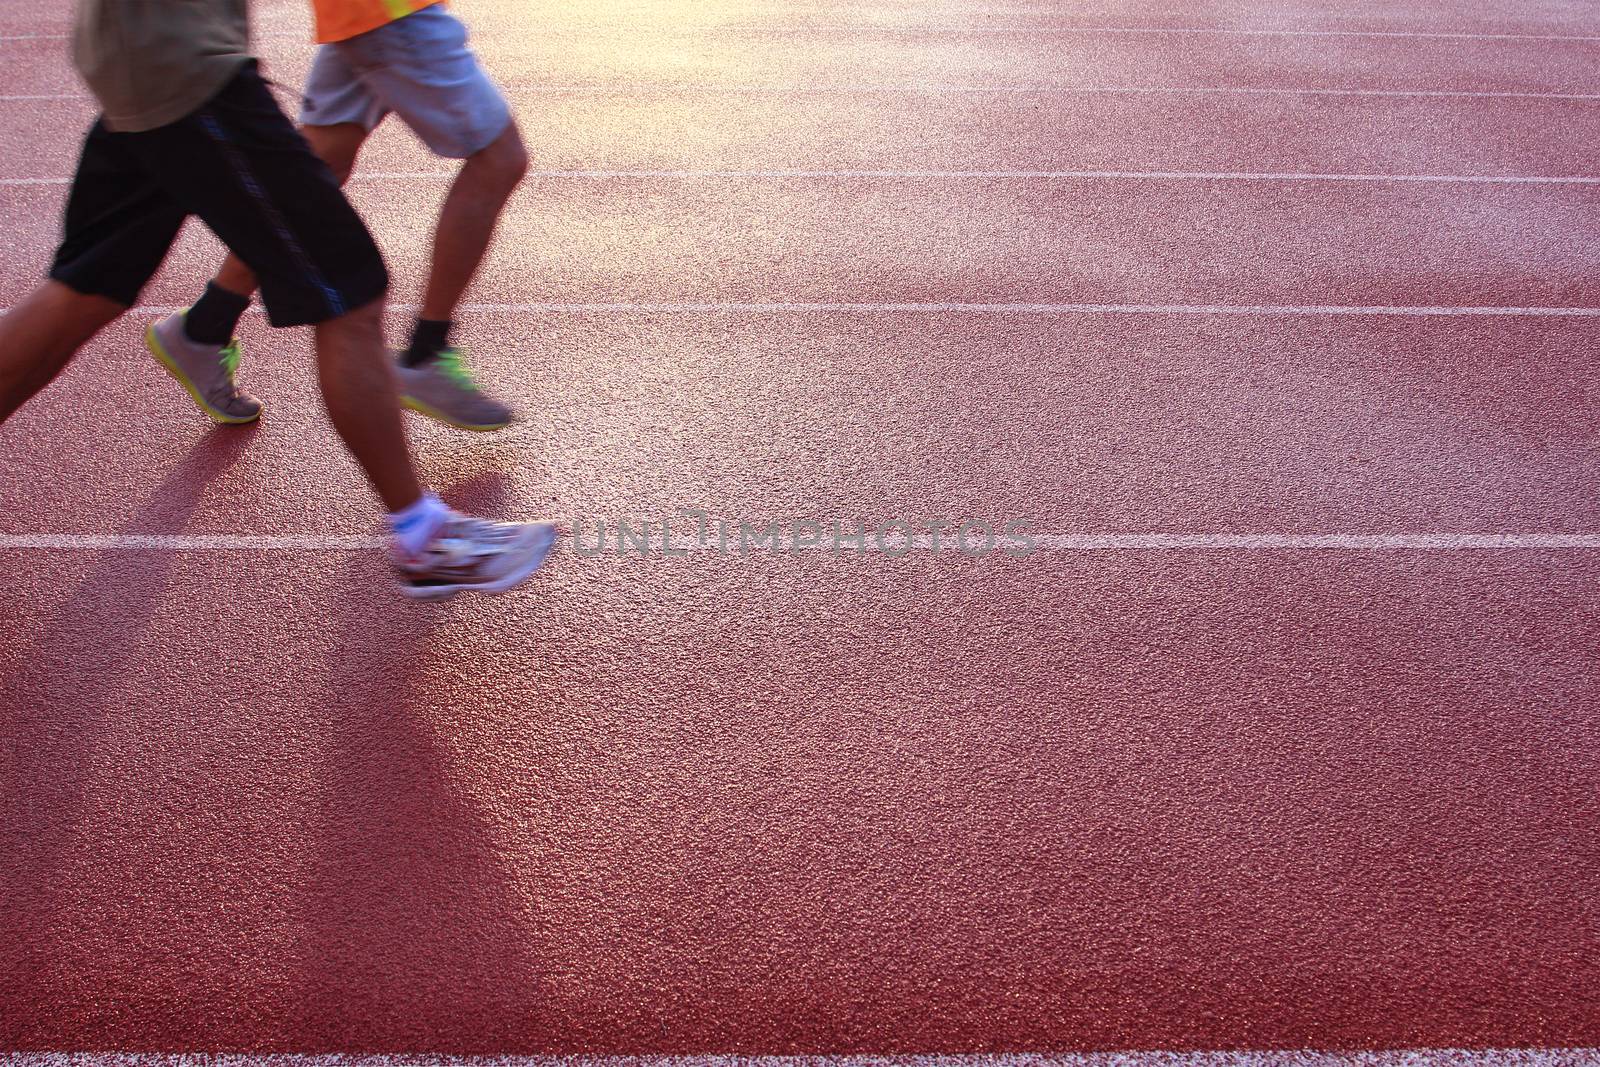 Running athlete at the stadium by foto76